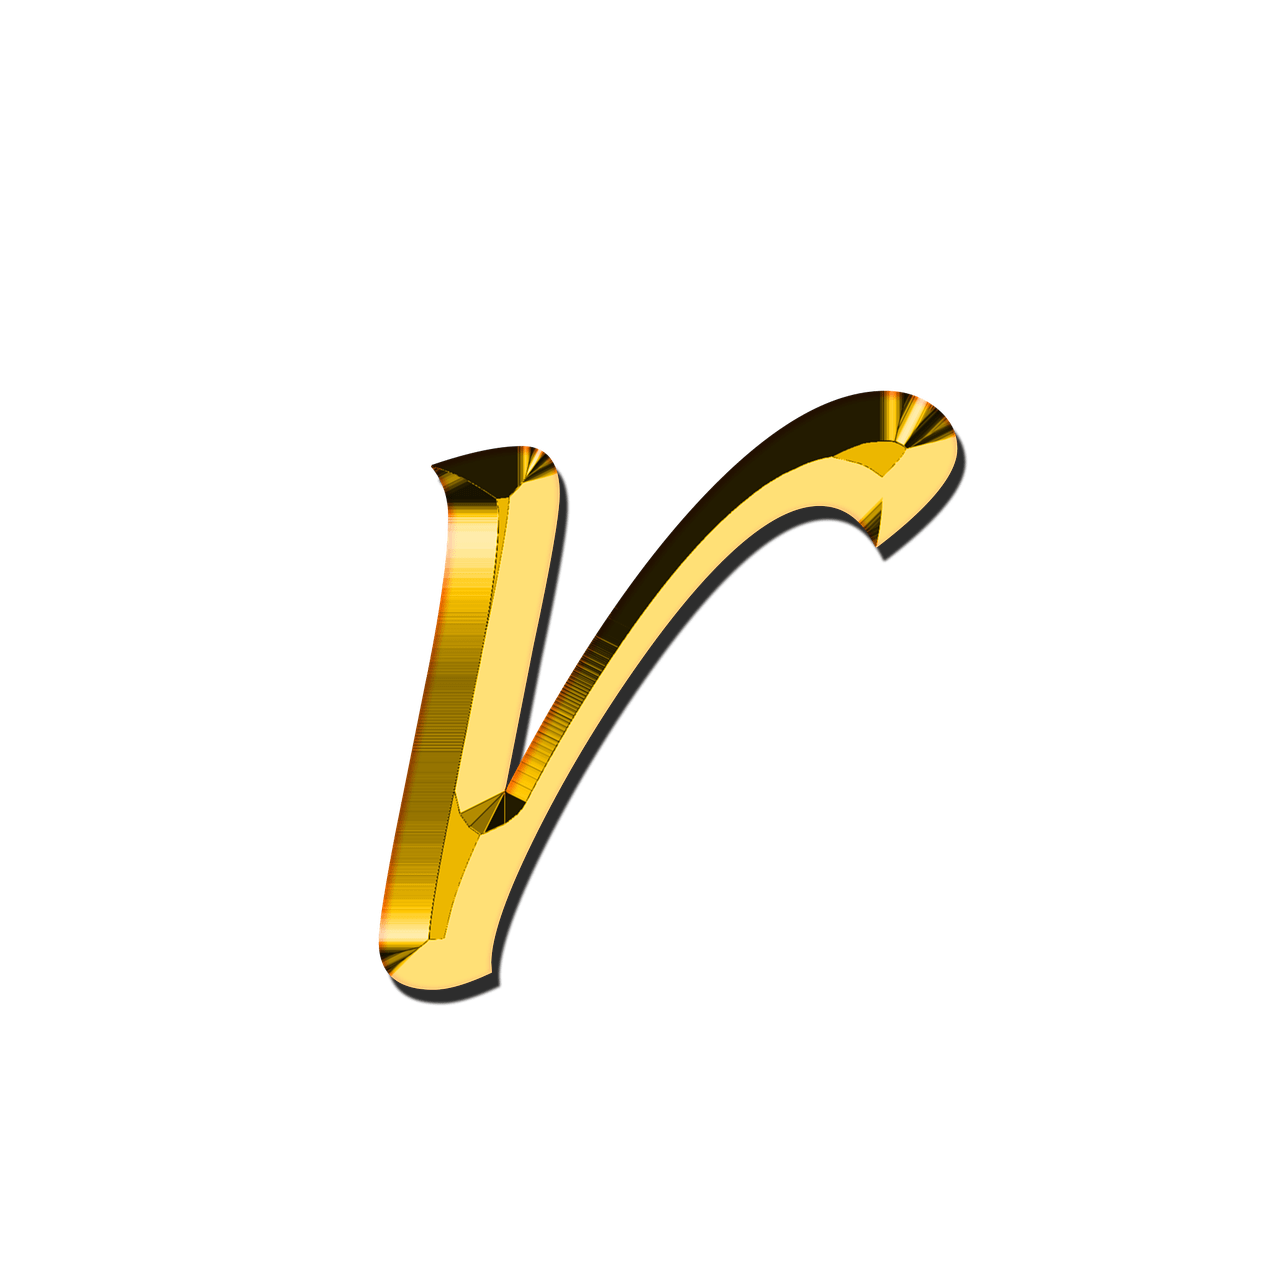 R Letter PNG Free Download